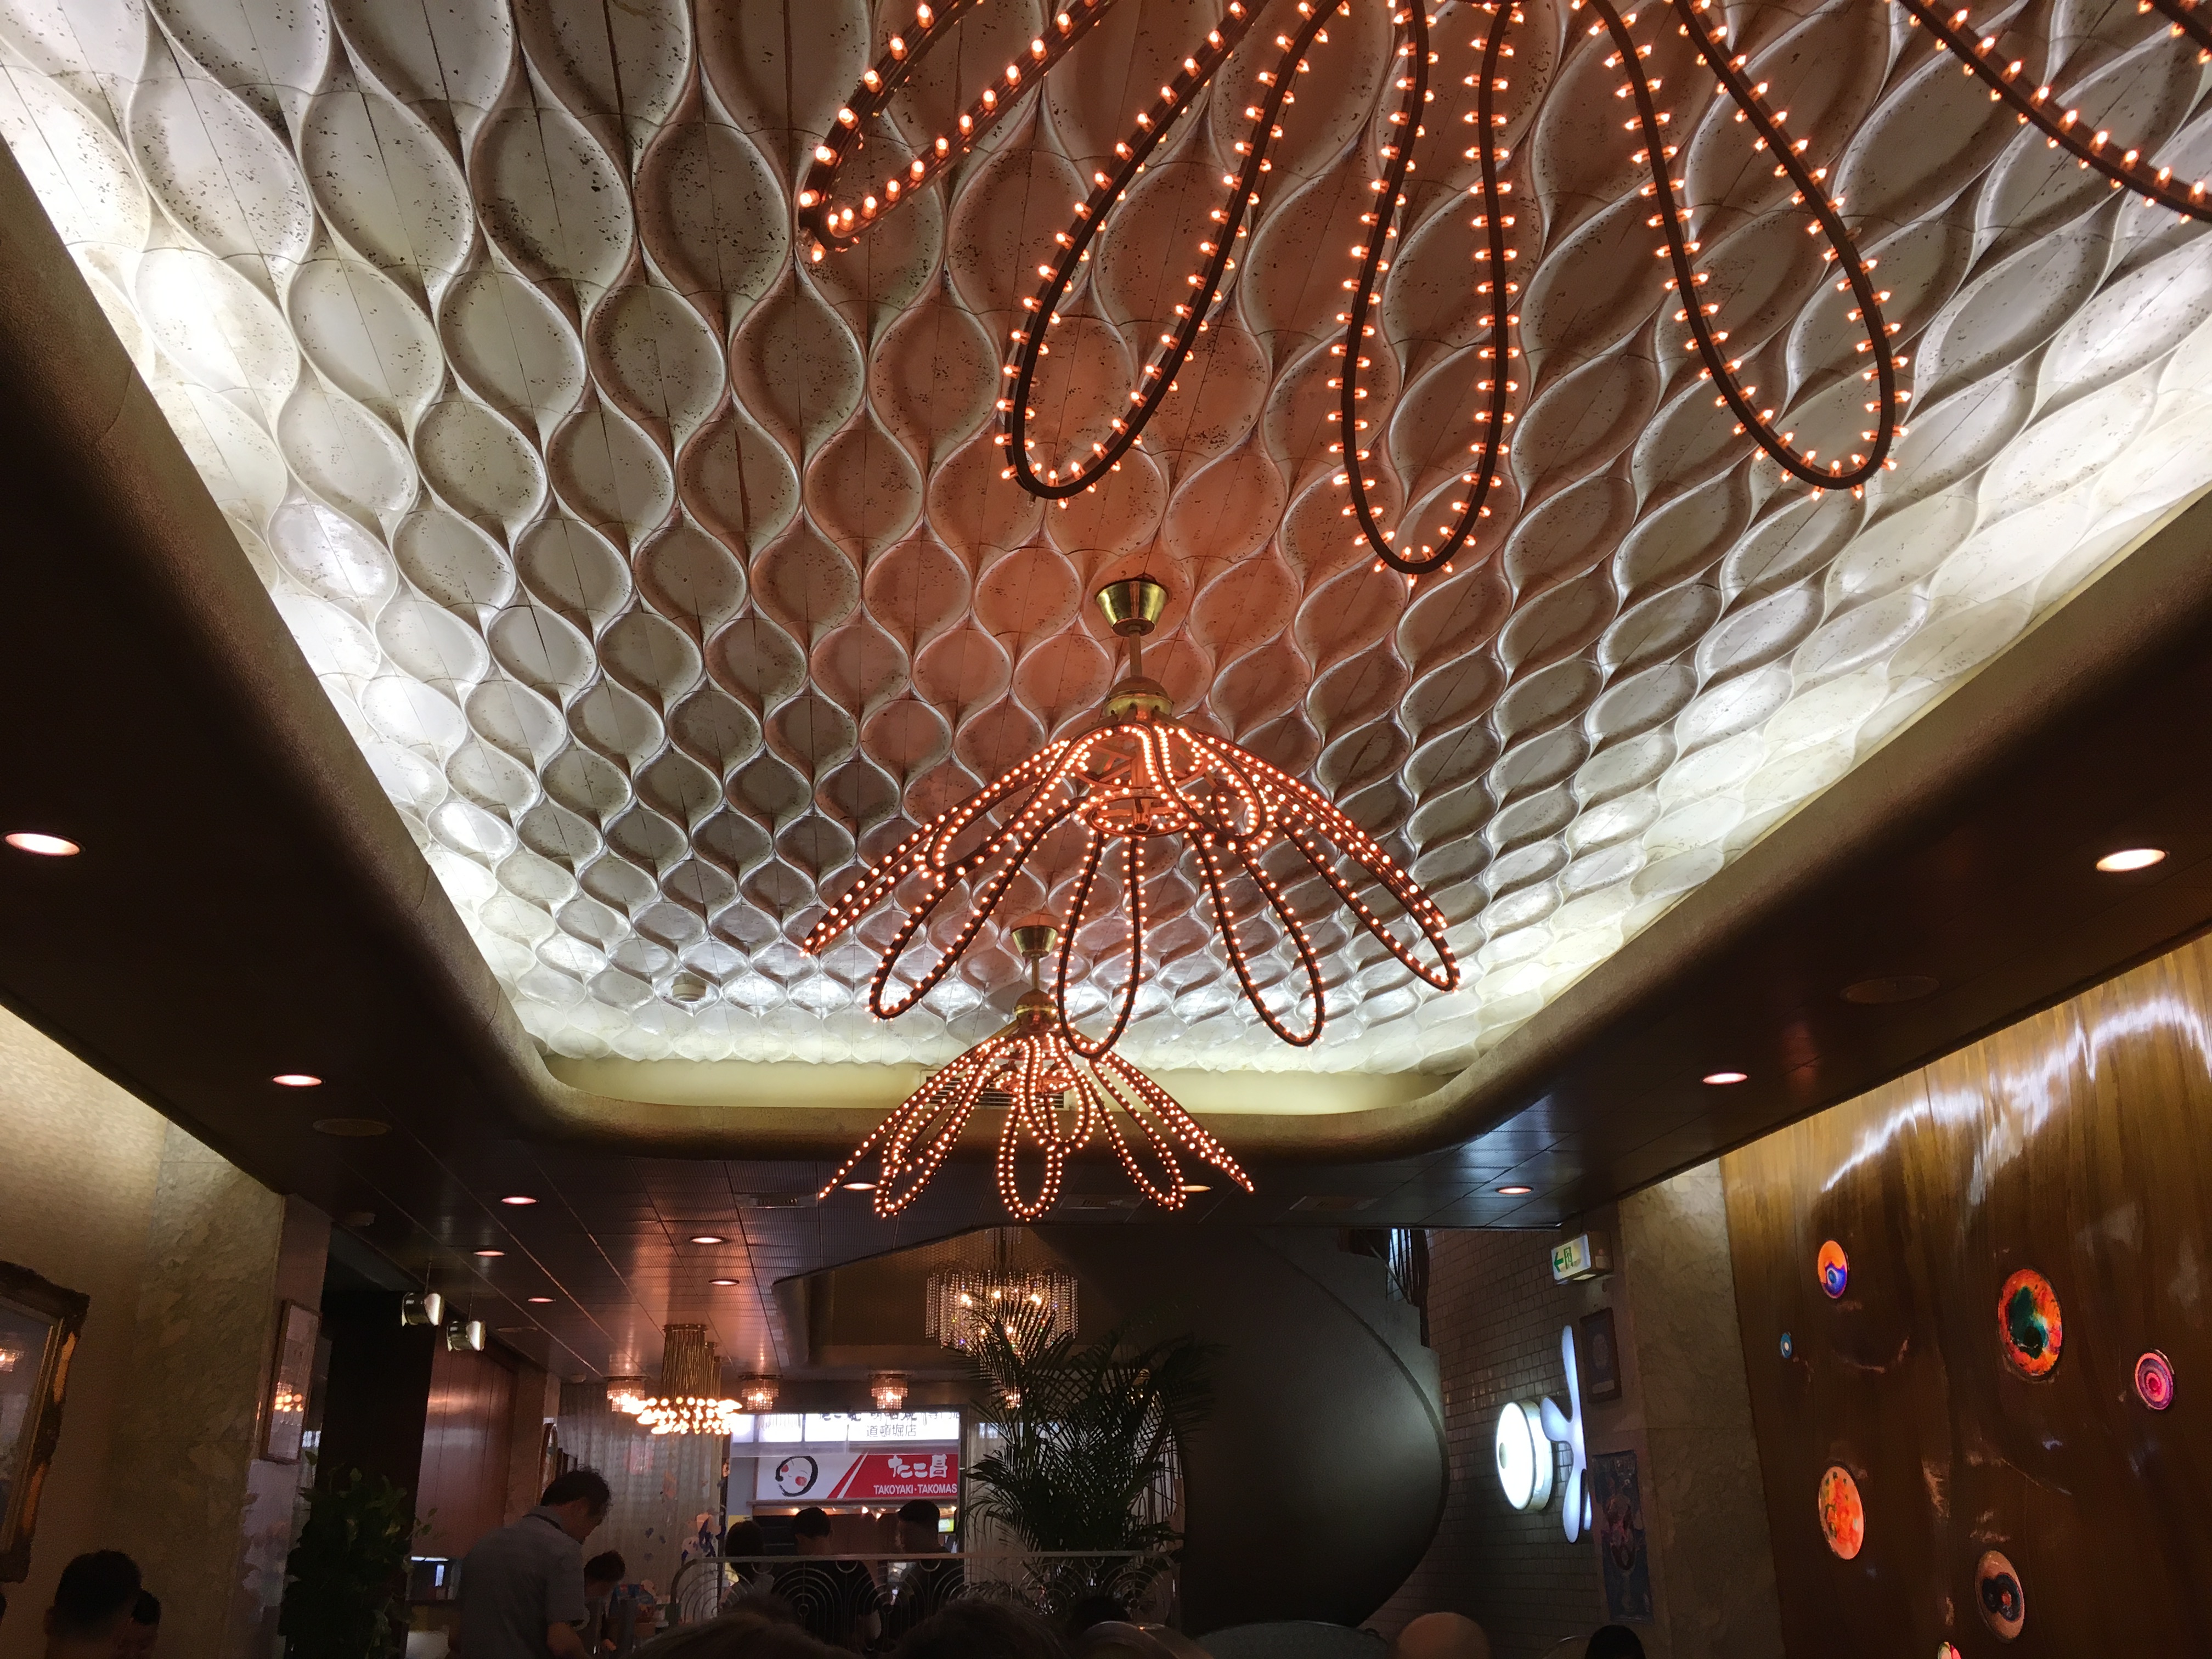 strange flower shaped light fixtures and other retro style decor